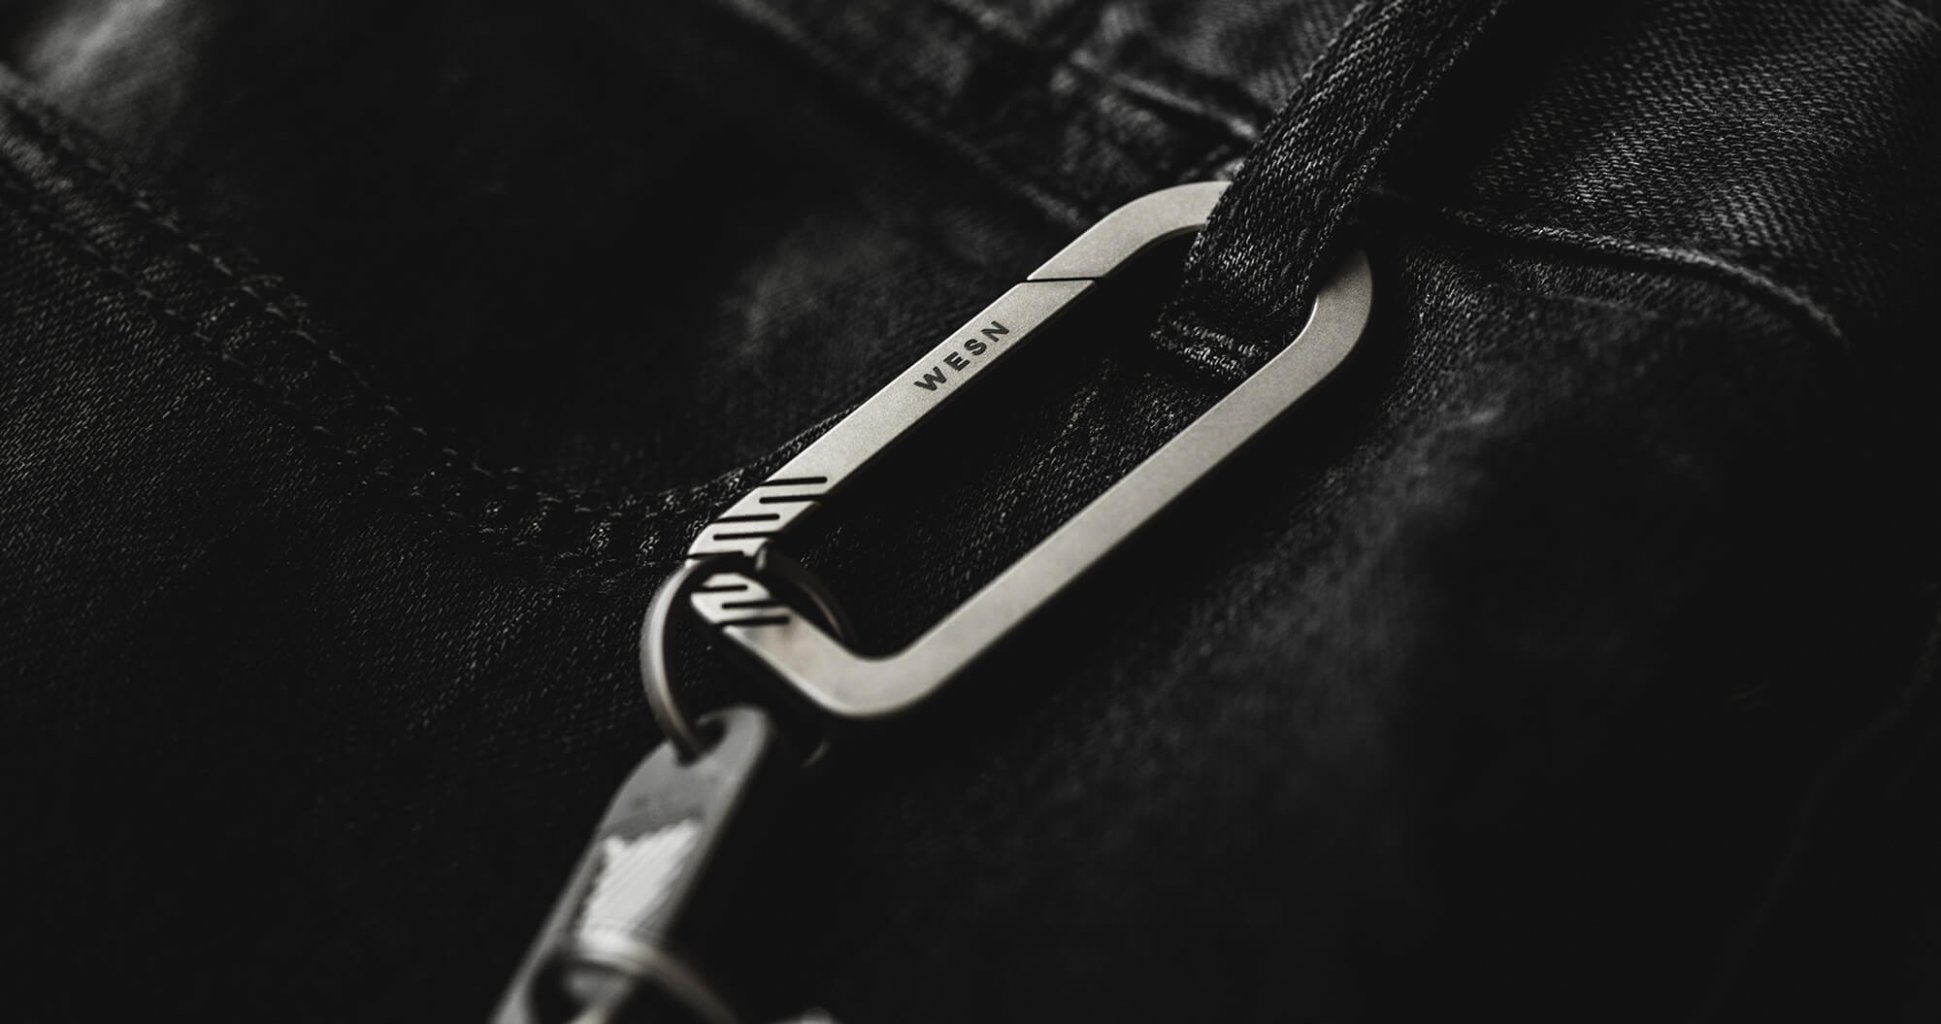 The CB Carabiner by WESN